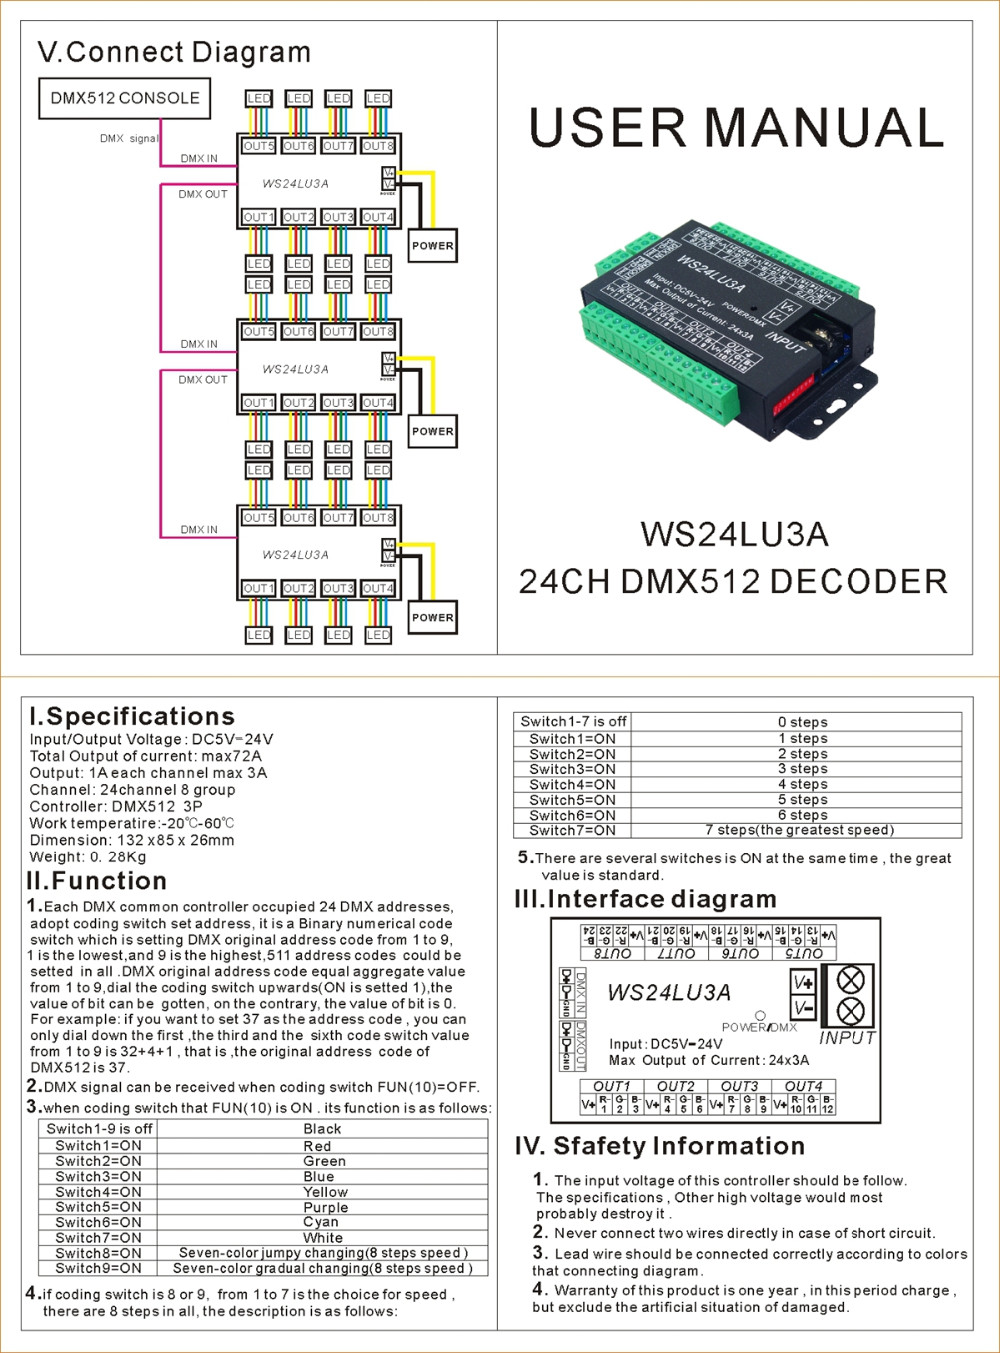 DMX_Controllers_and_Decoders_WS24LU3A_2